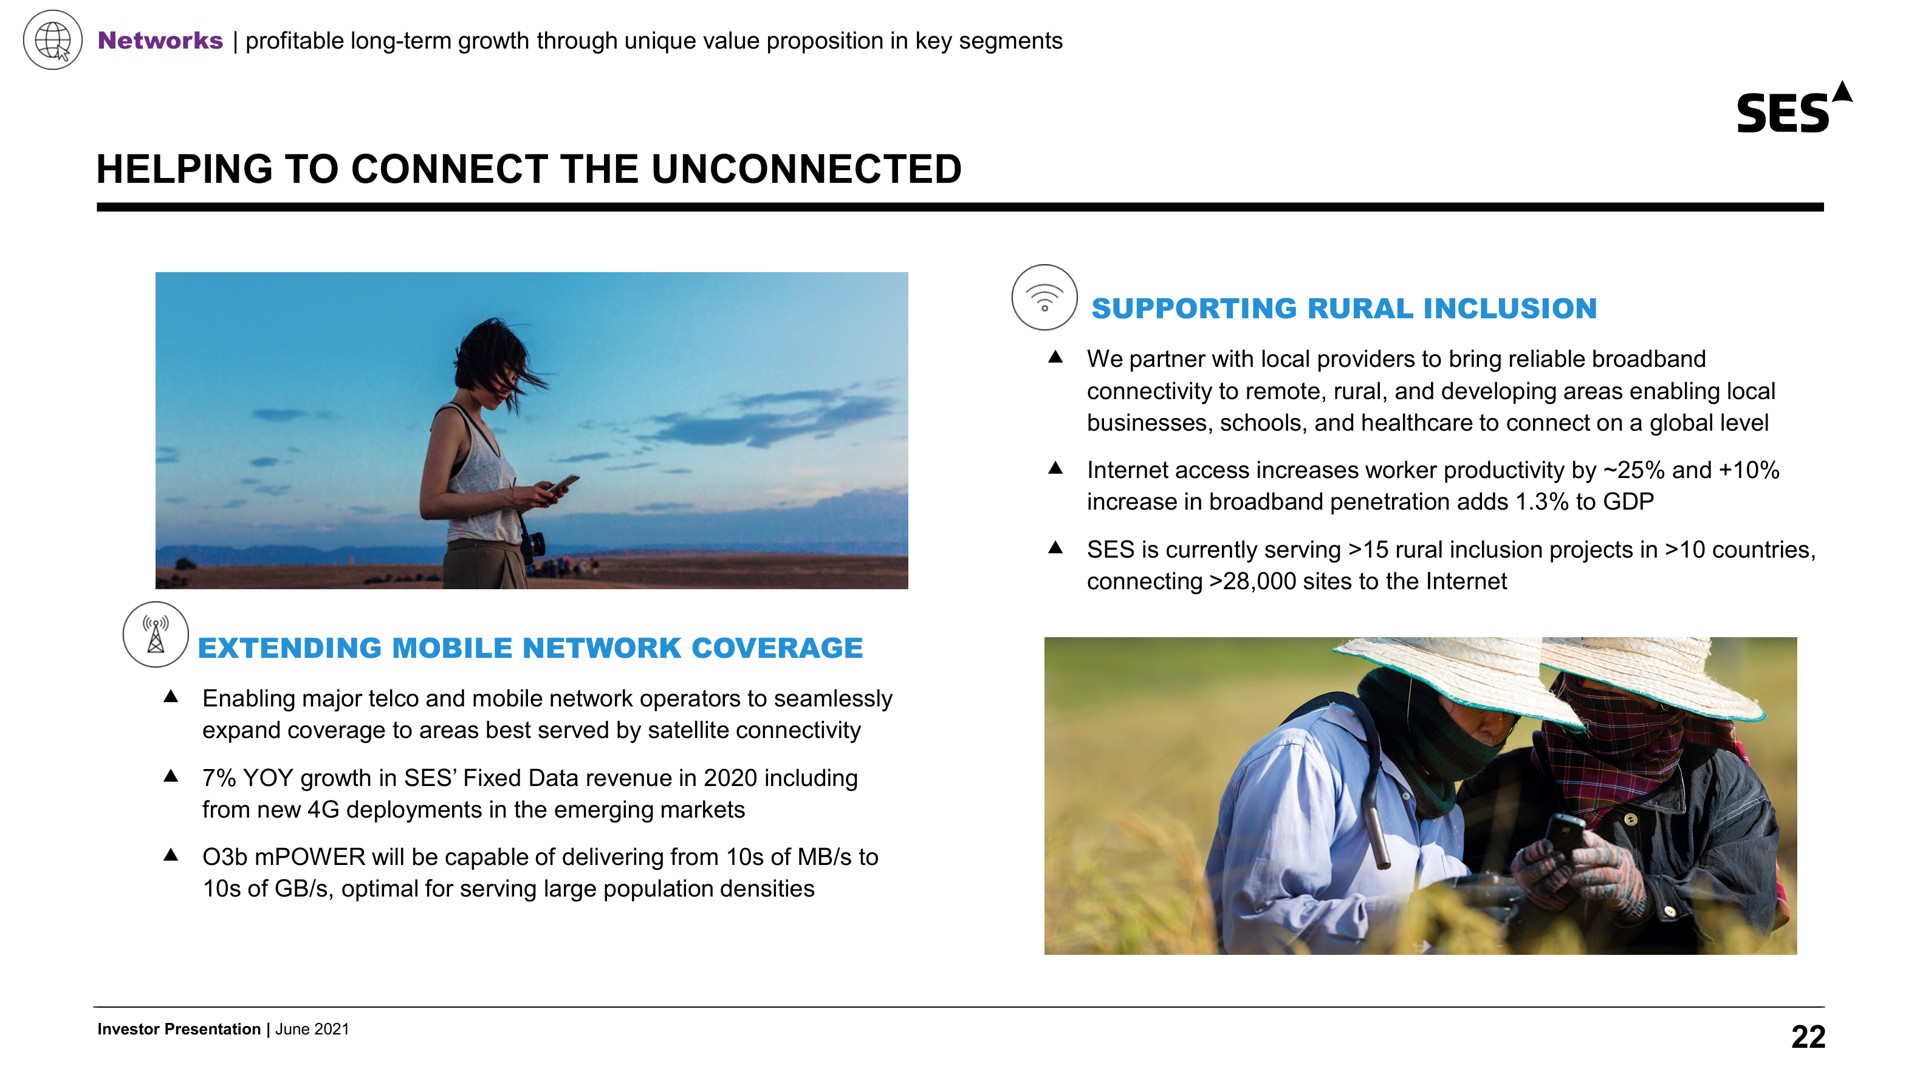 helping to connect the unconnected ses supporting rural inclusion a extending mobile network coverage | SES